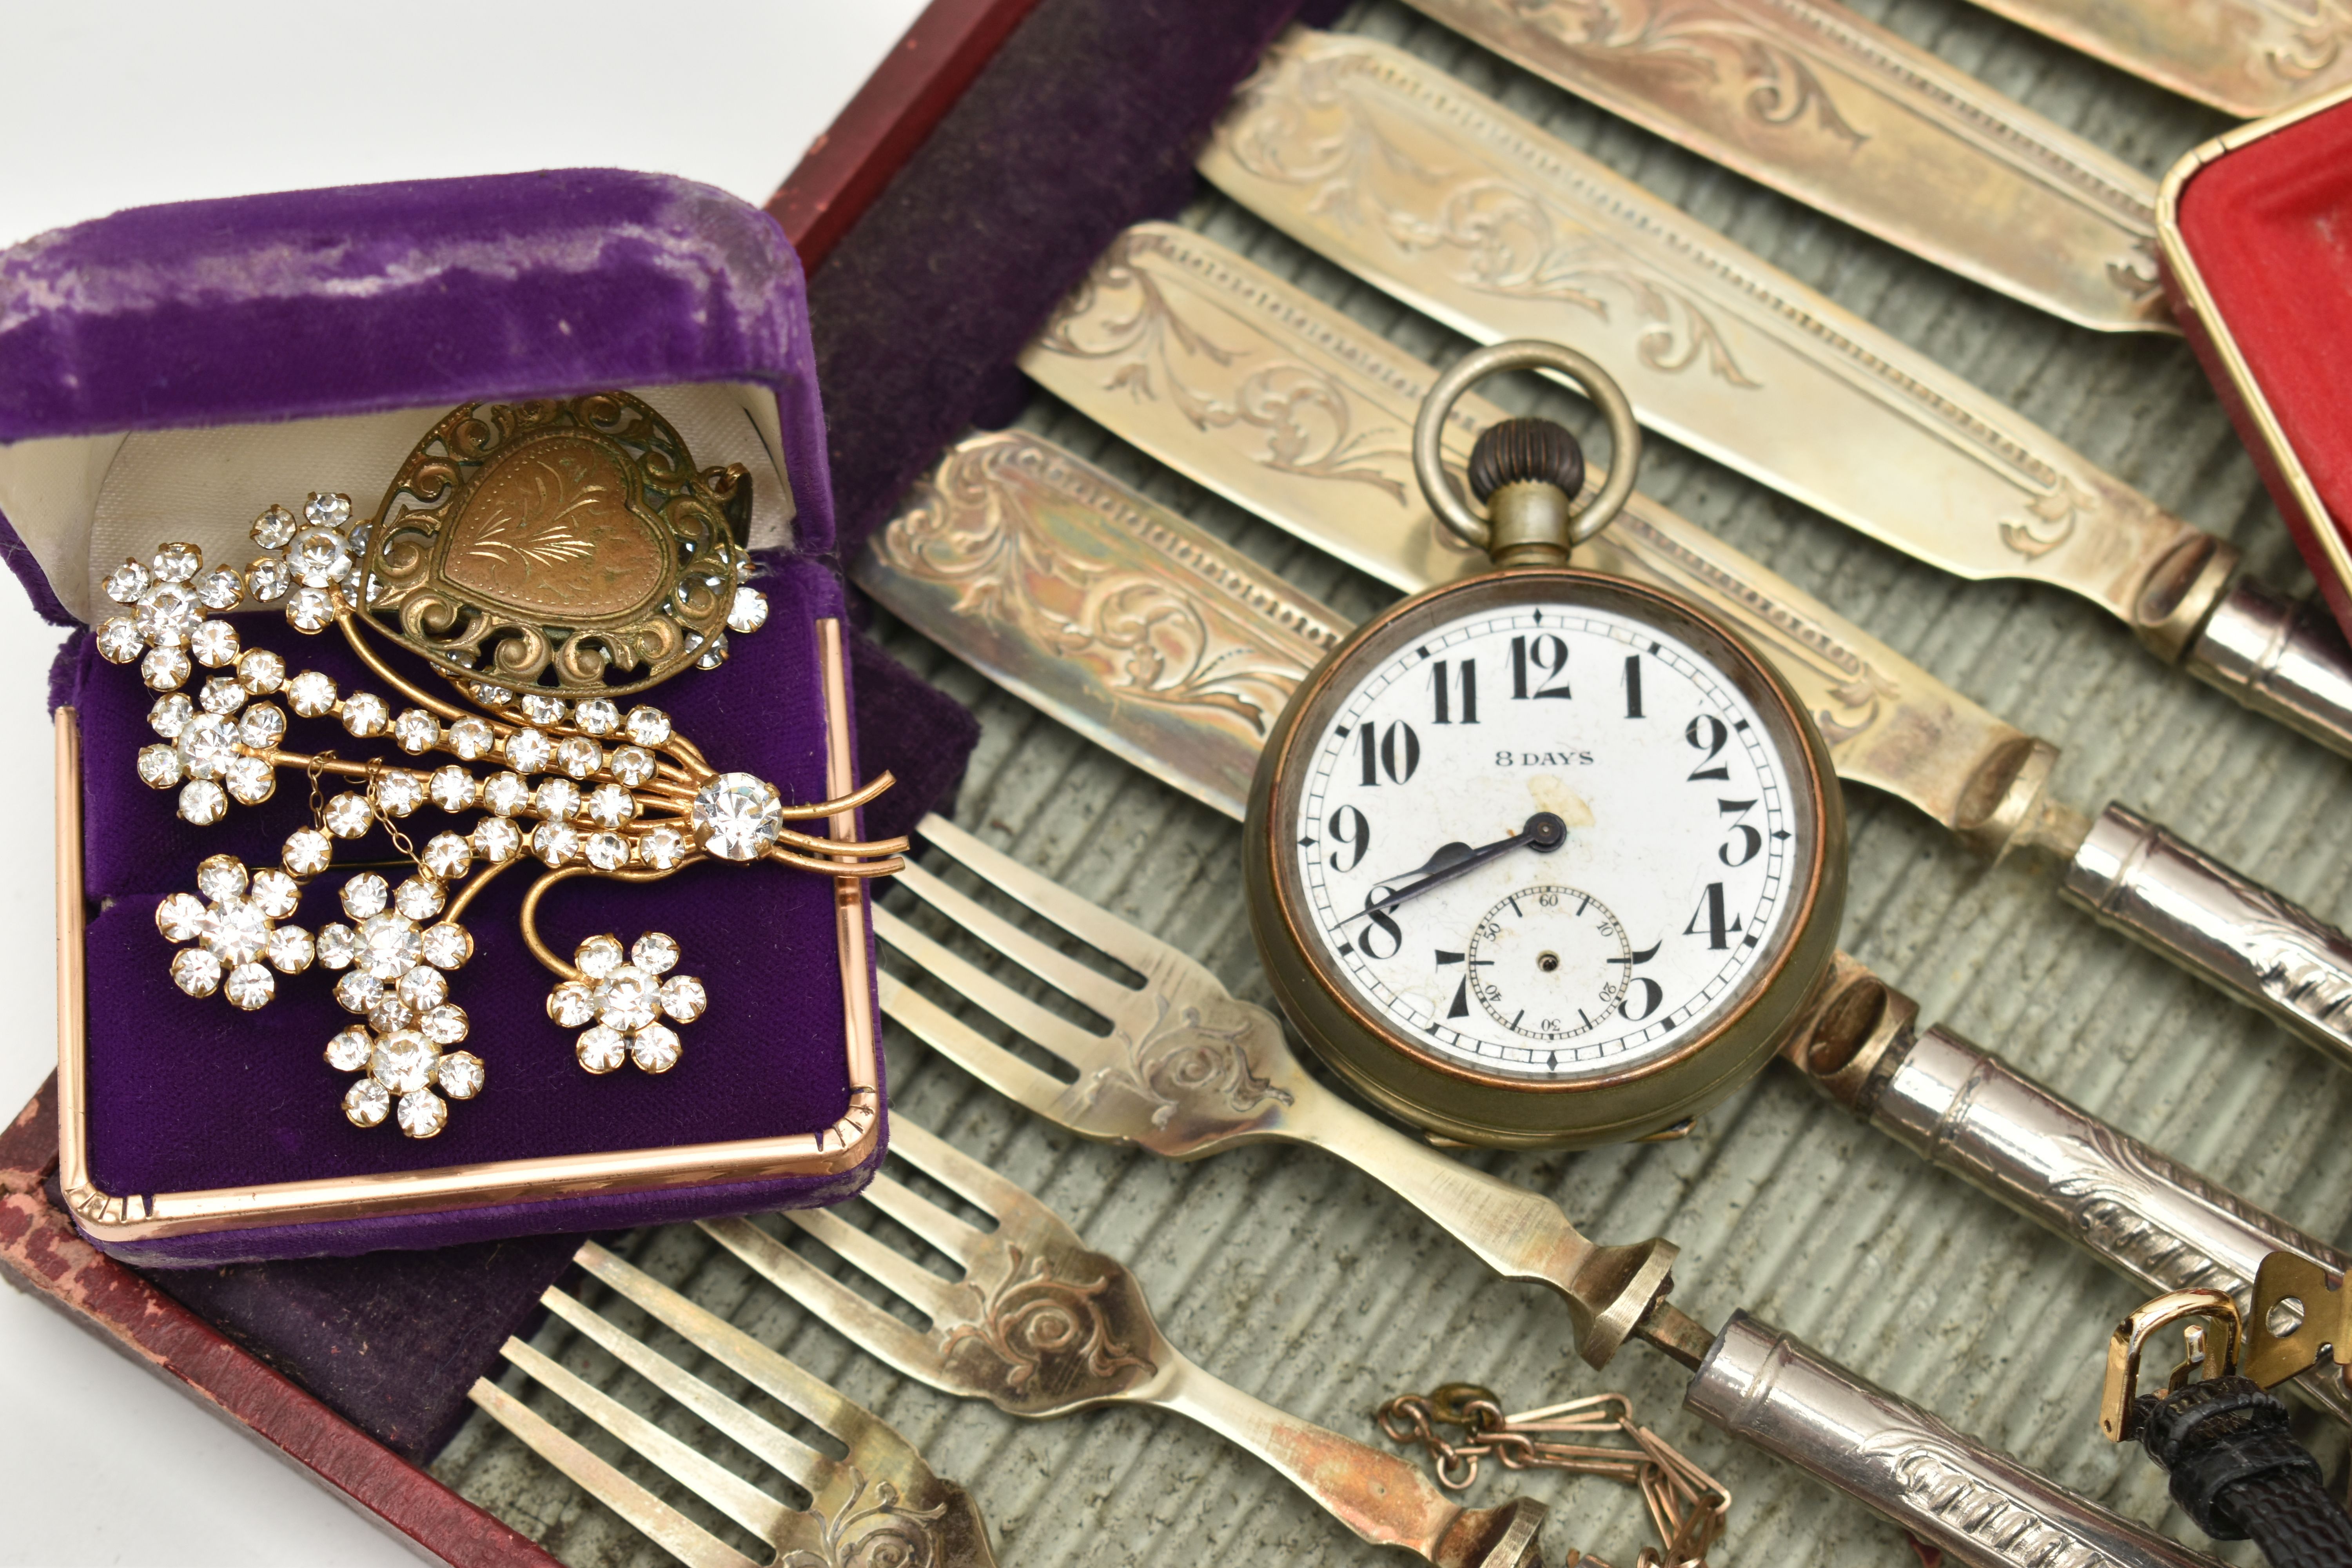 AN EARLY 20TH CENTURY, SILVER OPEN FACE POCKET WATCH AND OTHER ITEMS, key wound, round white dial - Image 3 of 7